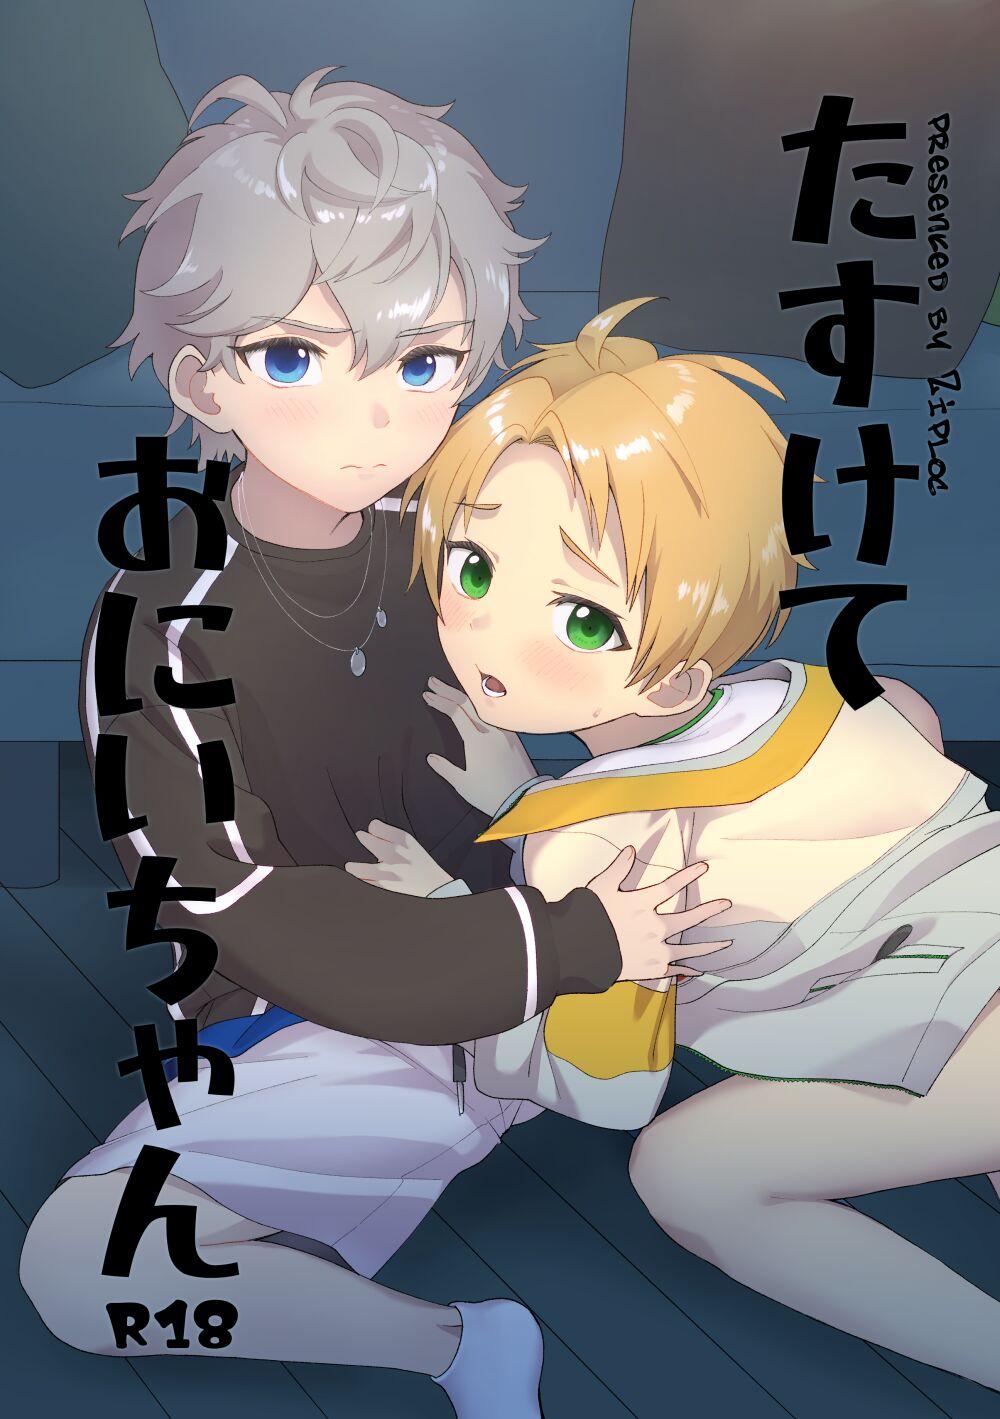 Old Man Tasukete Onii-chan - Ensemble stars Homosexual - Picture 3